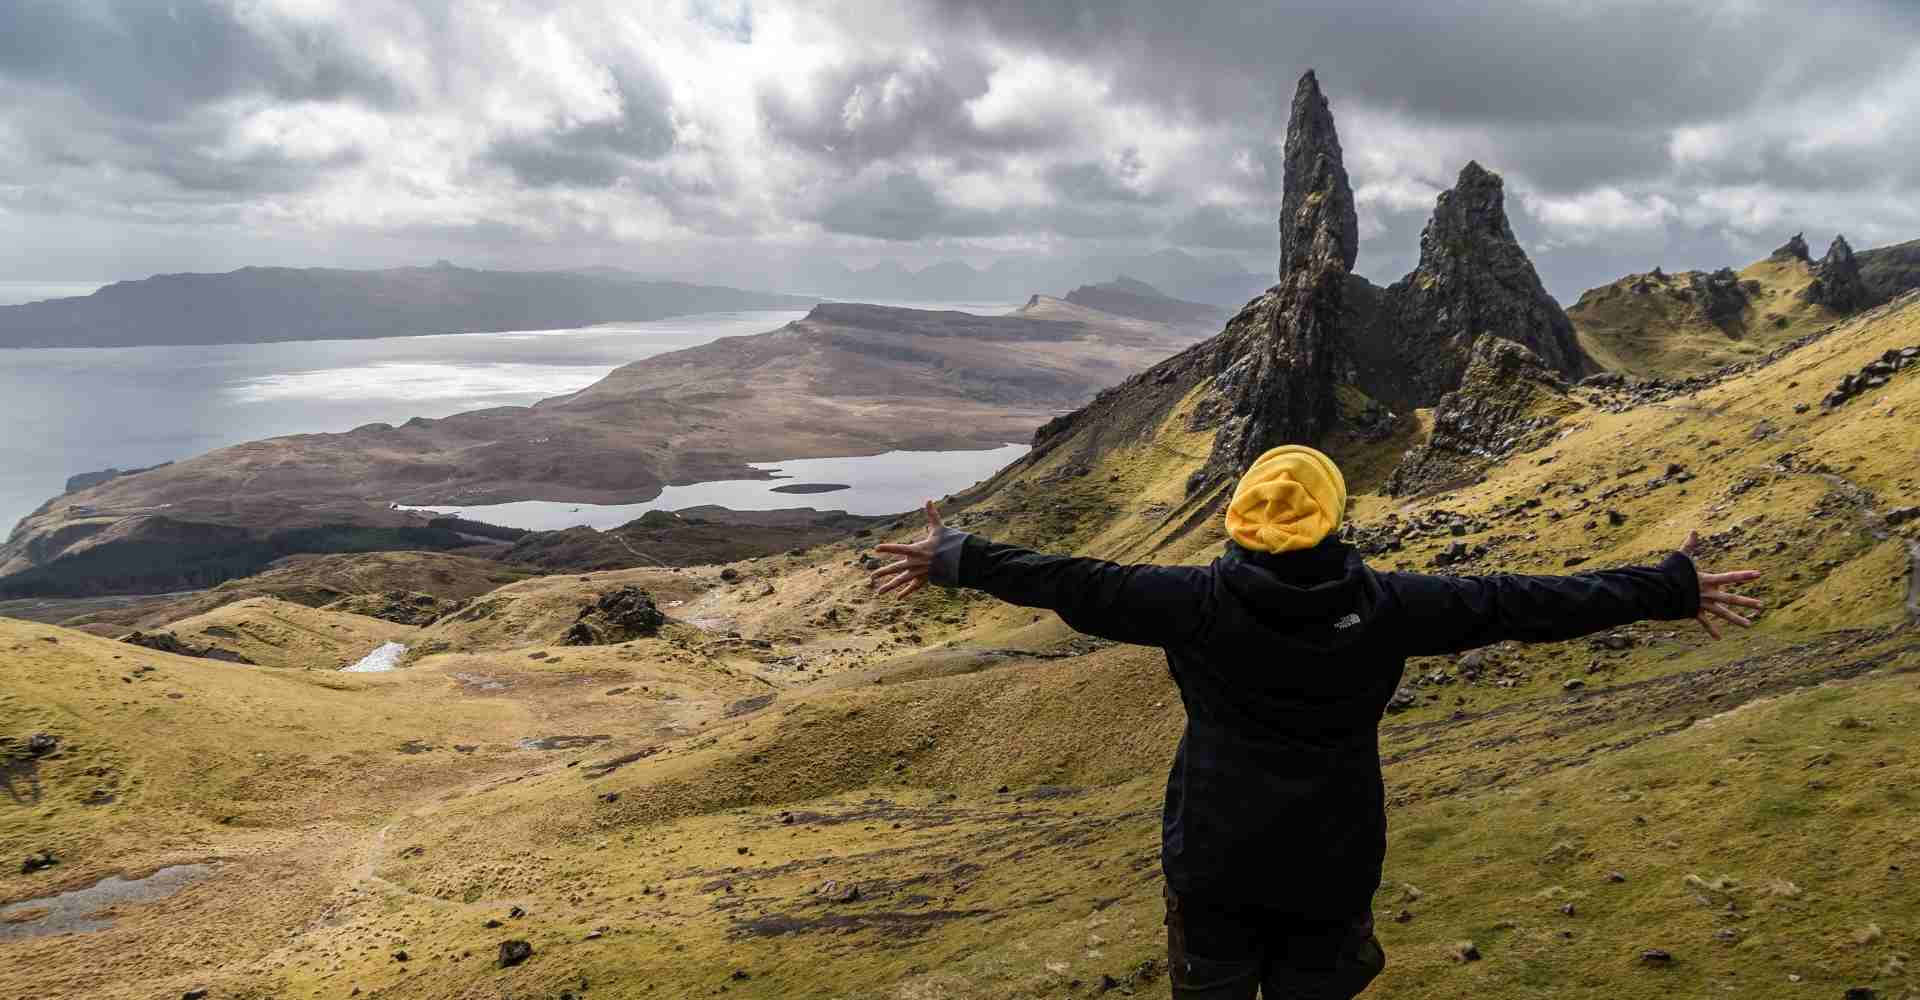 On working in Scotland: “Every placement is a new adventure”